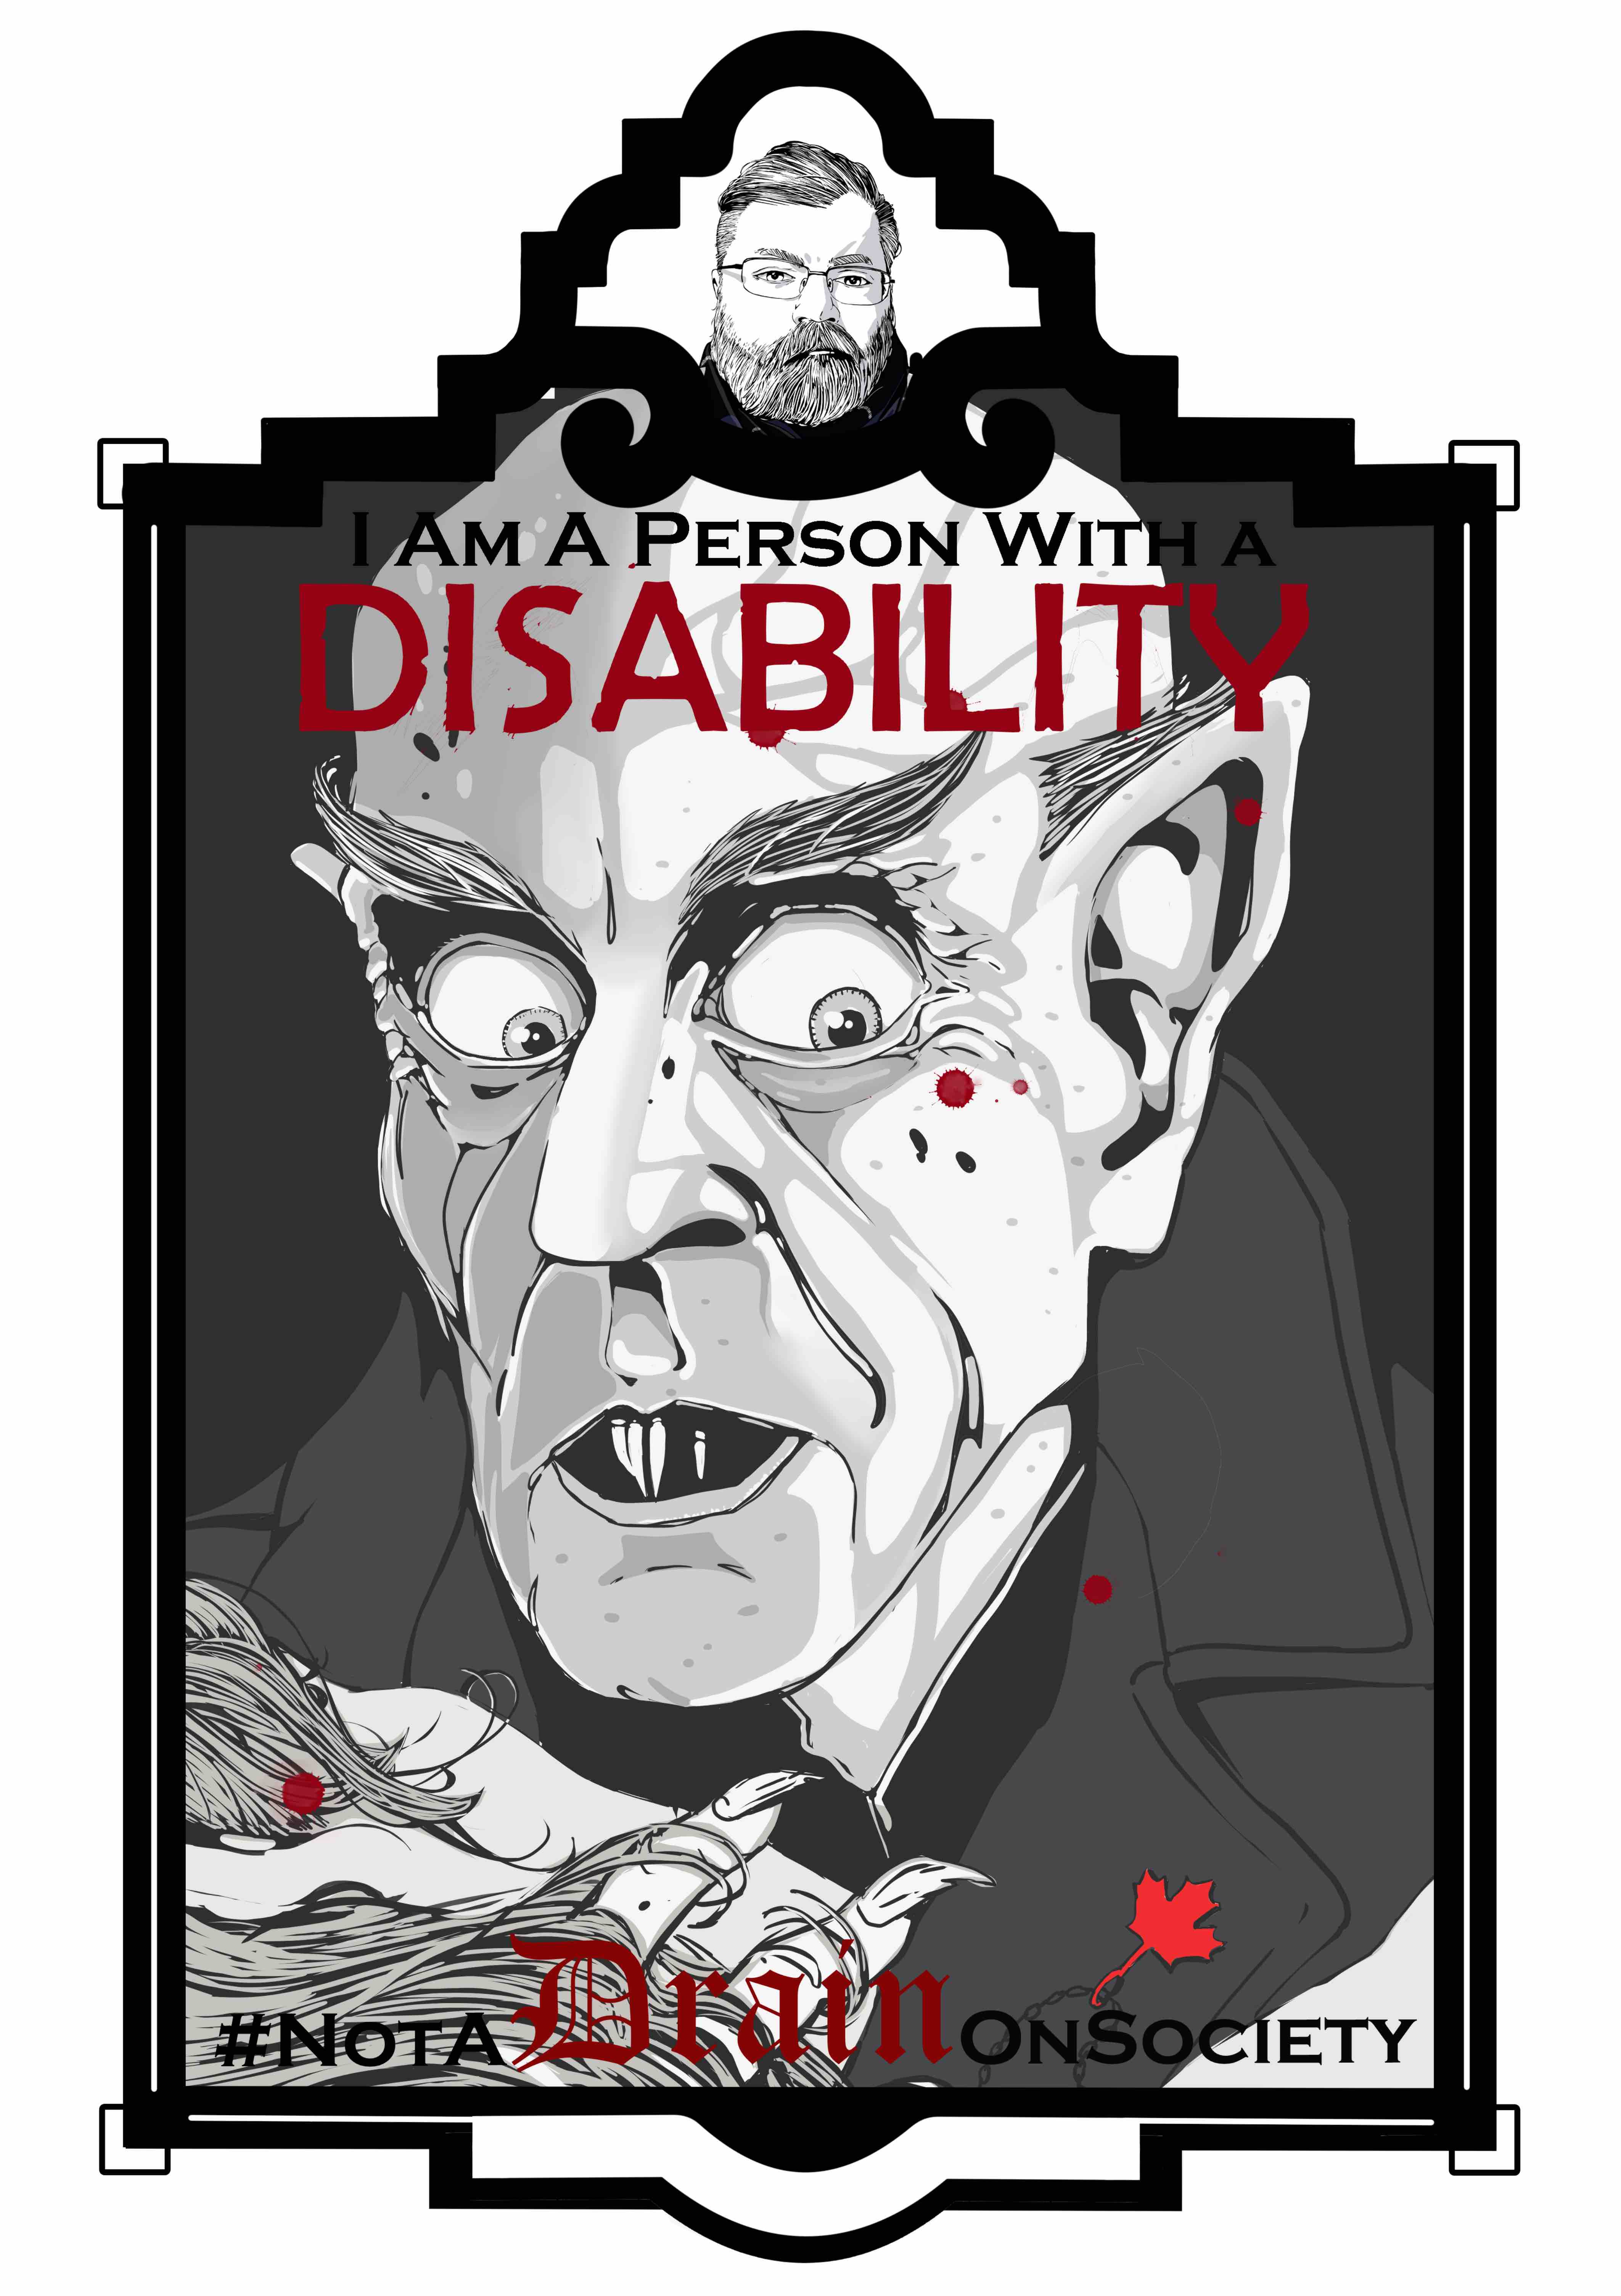 An illustration of the vampire Nosferatu from the shoulders up in an art deco frame. The frame consists of a small marquee at the top with an image of the artist and the main image below. The text “I am a person with a disability.’ Sits at the top of the illustration. The word “Disability” is in all caps and is colored a Blood red with the text “# Not A Drain on Society” is at the bottom of the illustration with “Drain” in a gothic font colored blood red. The illustration of Nosferatu is gray-scale line art. The vampire has large, pointed ears and round bulbus eyes. It has little hair and bushy eyebrows. Its nose is long, and its mouth is parted slightly showing its long needle like teeth. Nosferatu looks down at its victim holding her head with its long fingers and sharp talon like nails. A necklace around her neck has a red maple leaf. 